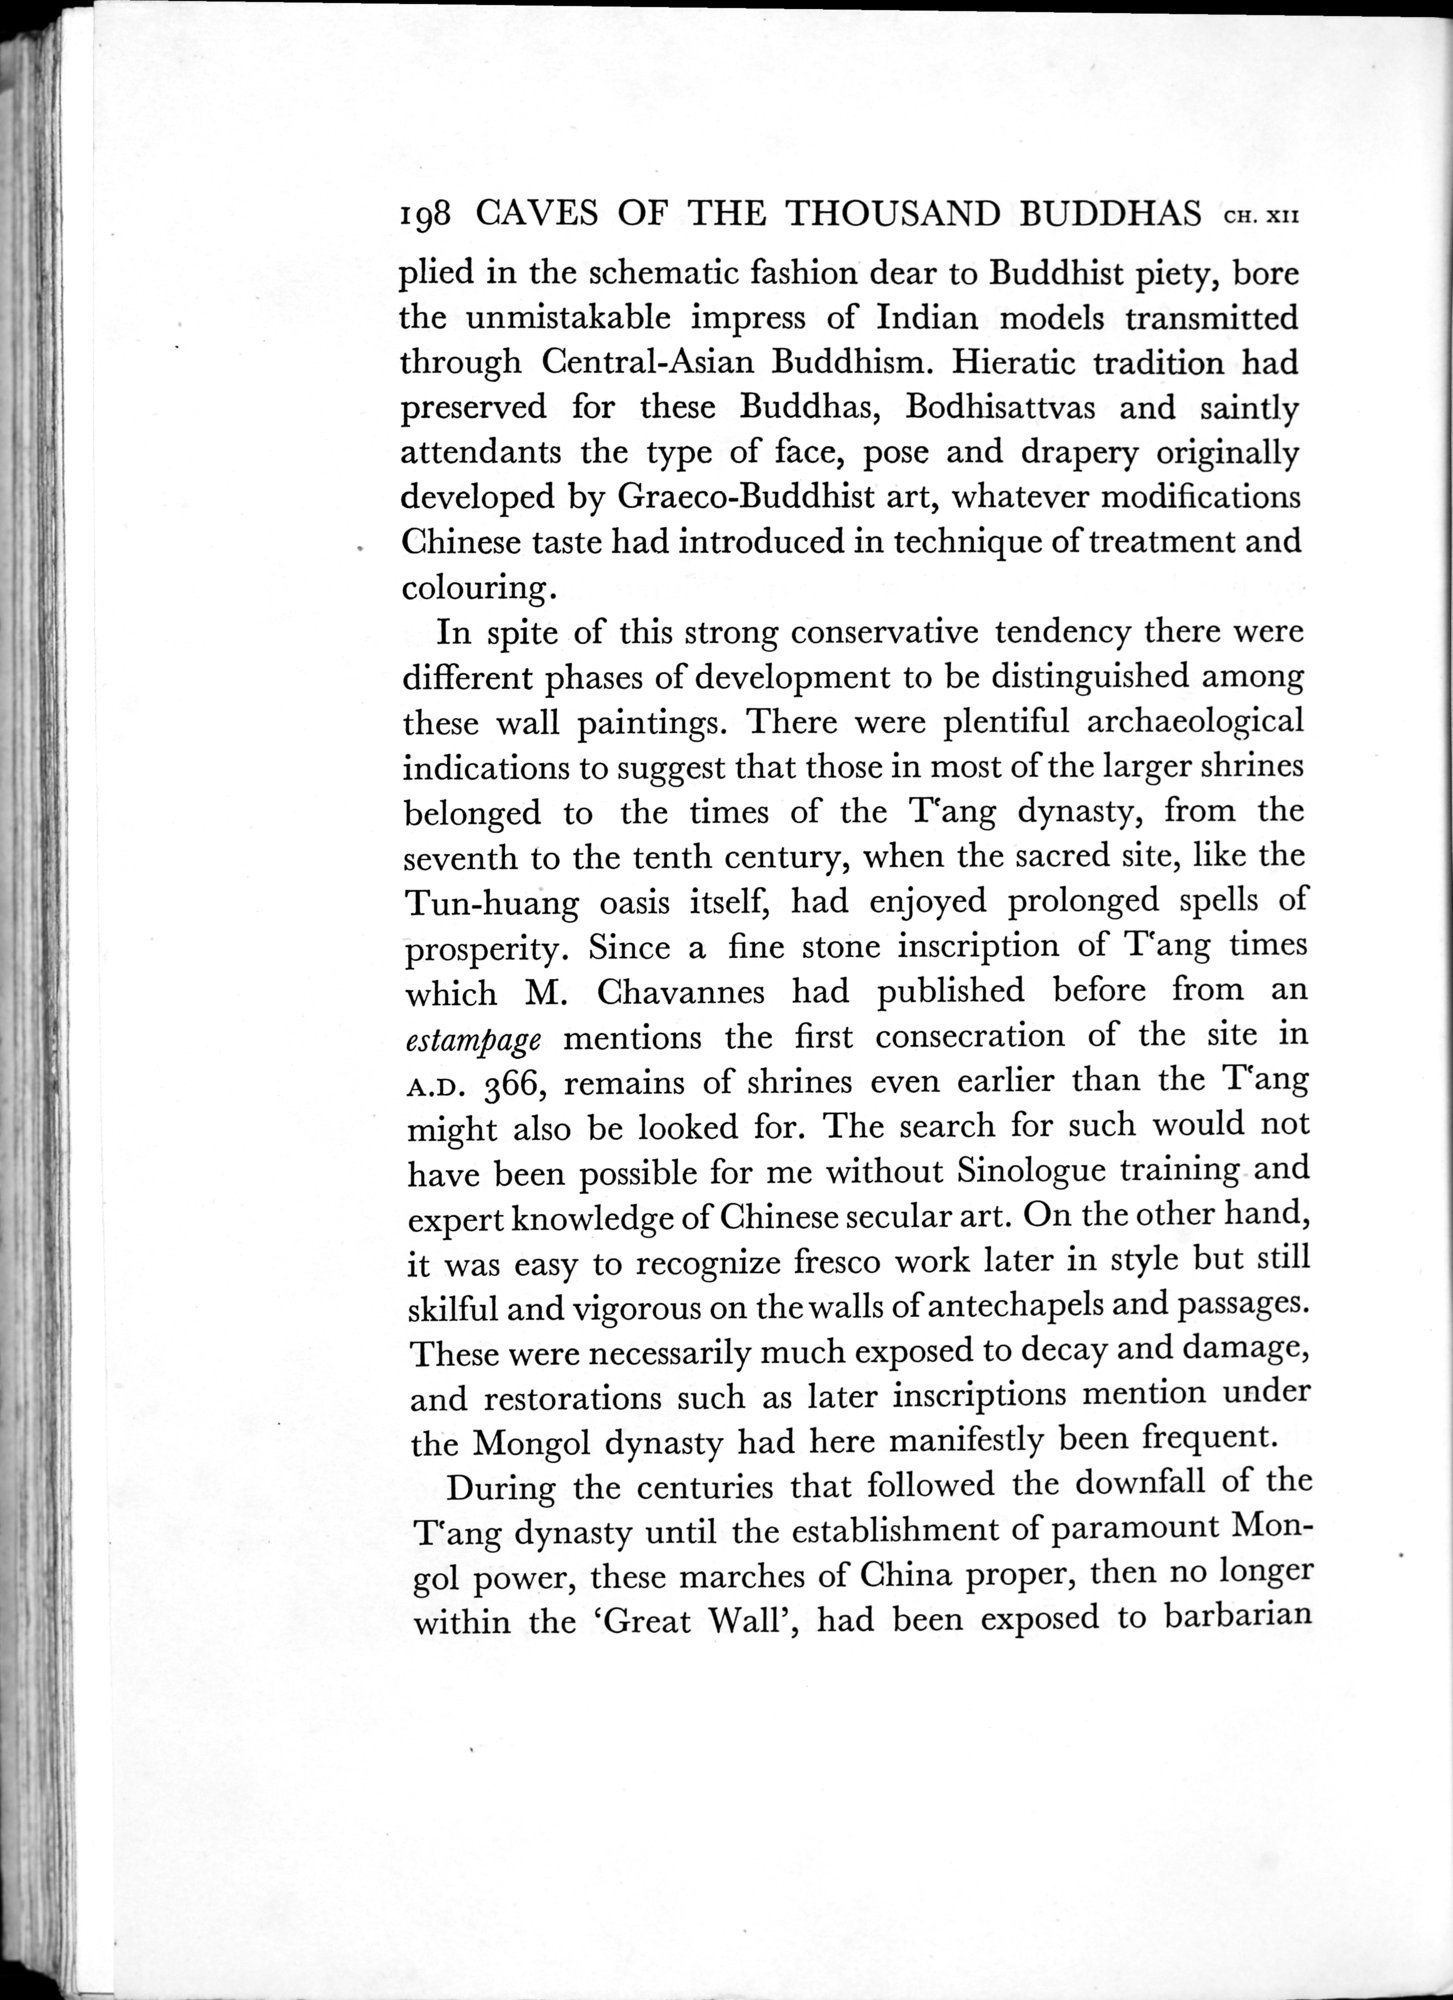 On Ancient Central-Asian Tracks : vol.1 / Page 328 (Grayscale High Resolution Image)